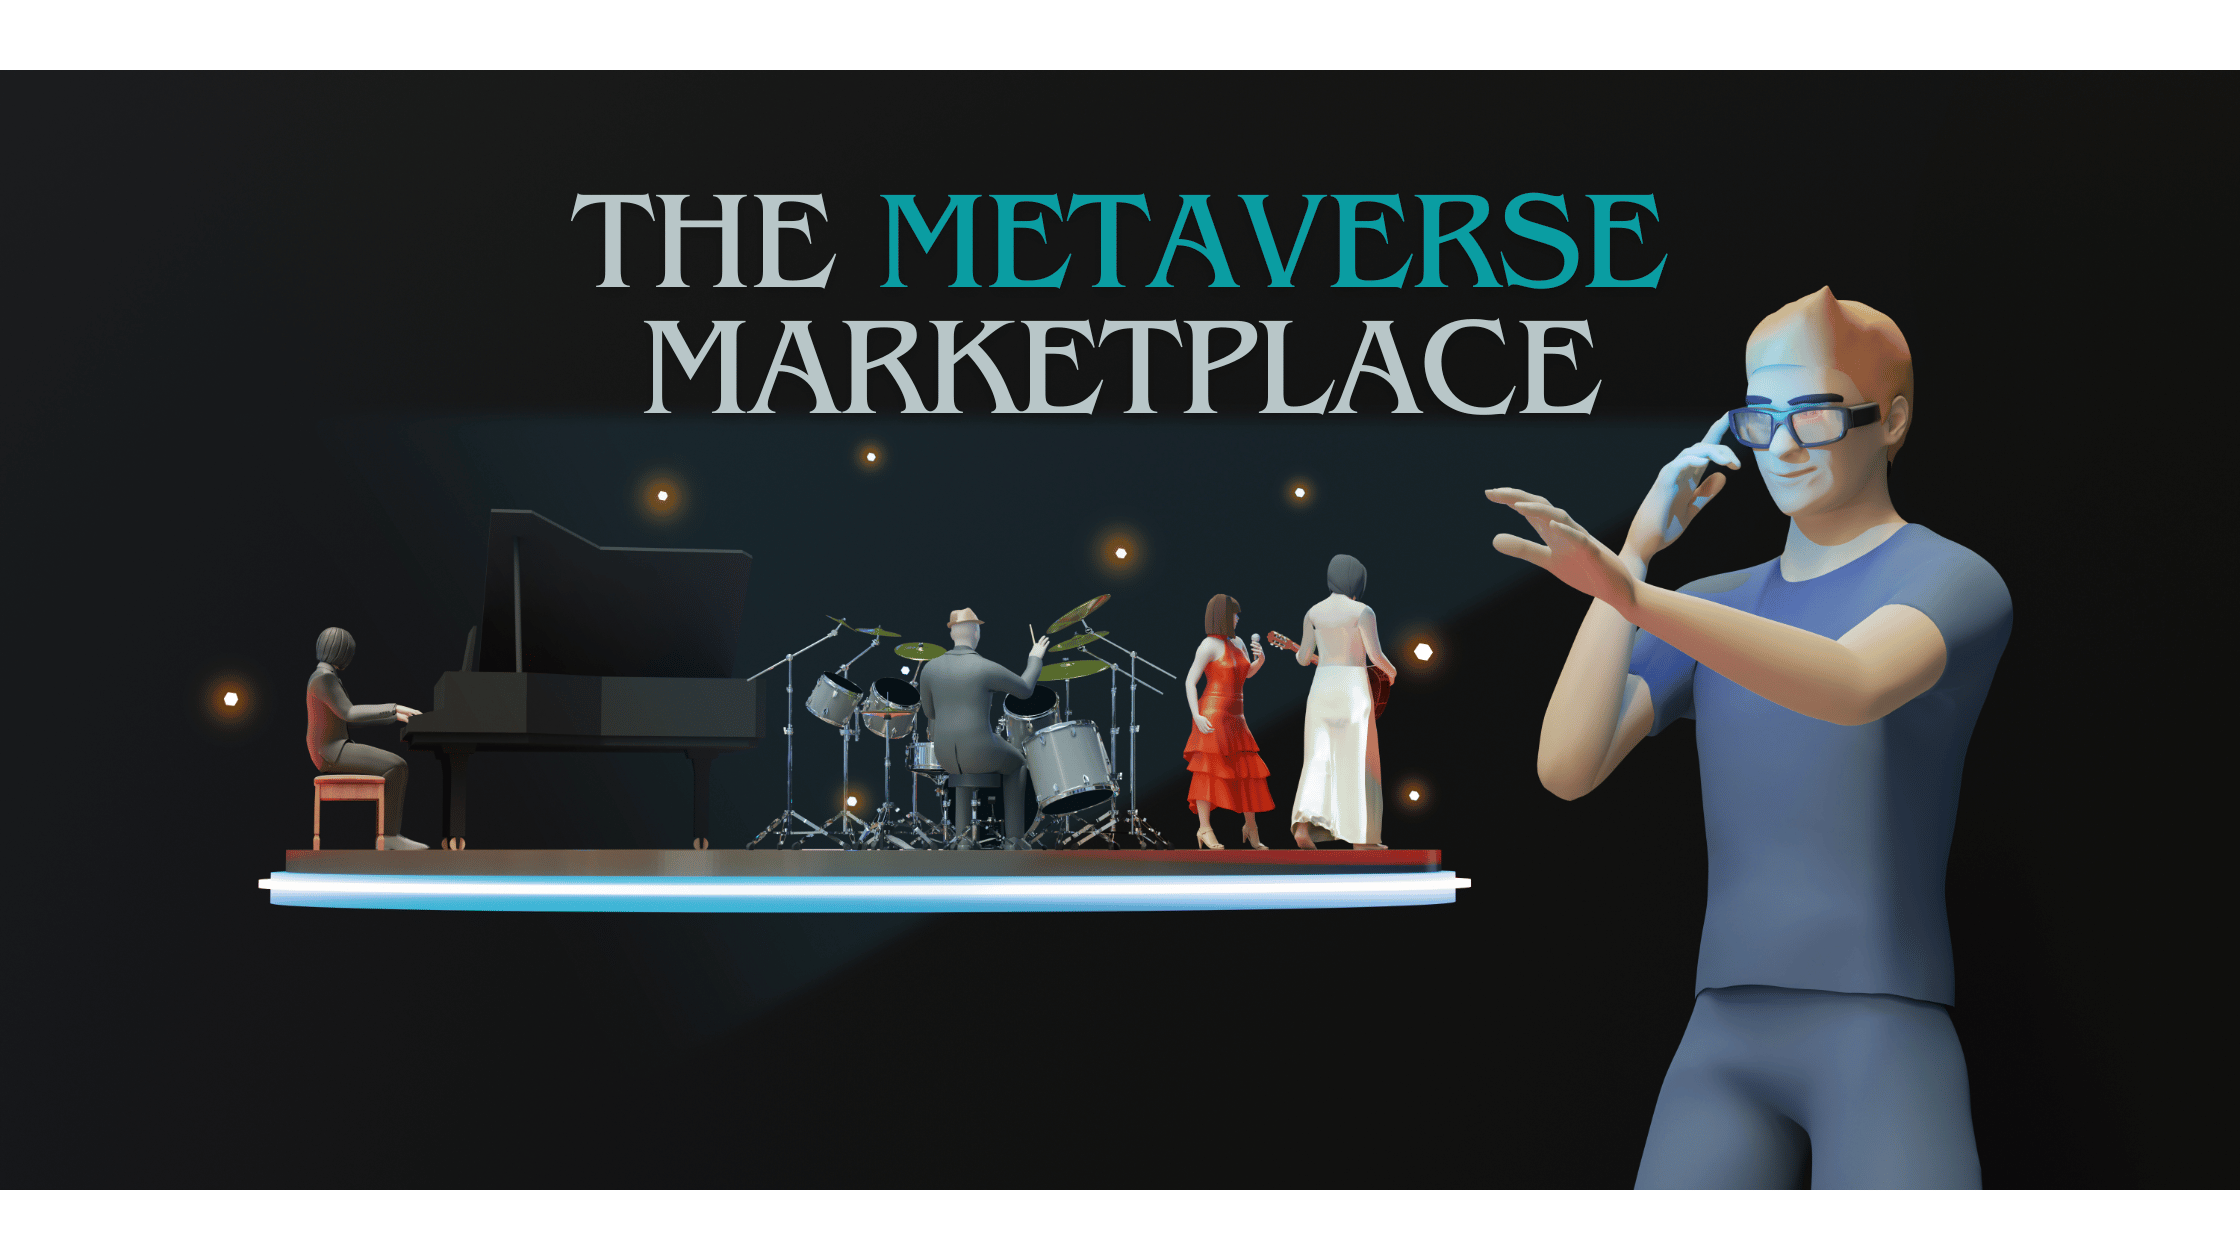 The Metaverse Marketplace: How Brands Can Prepare for the Next Frontier of Commerce